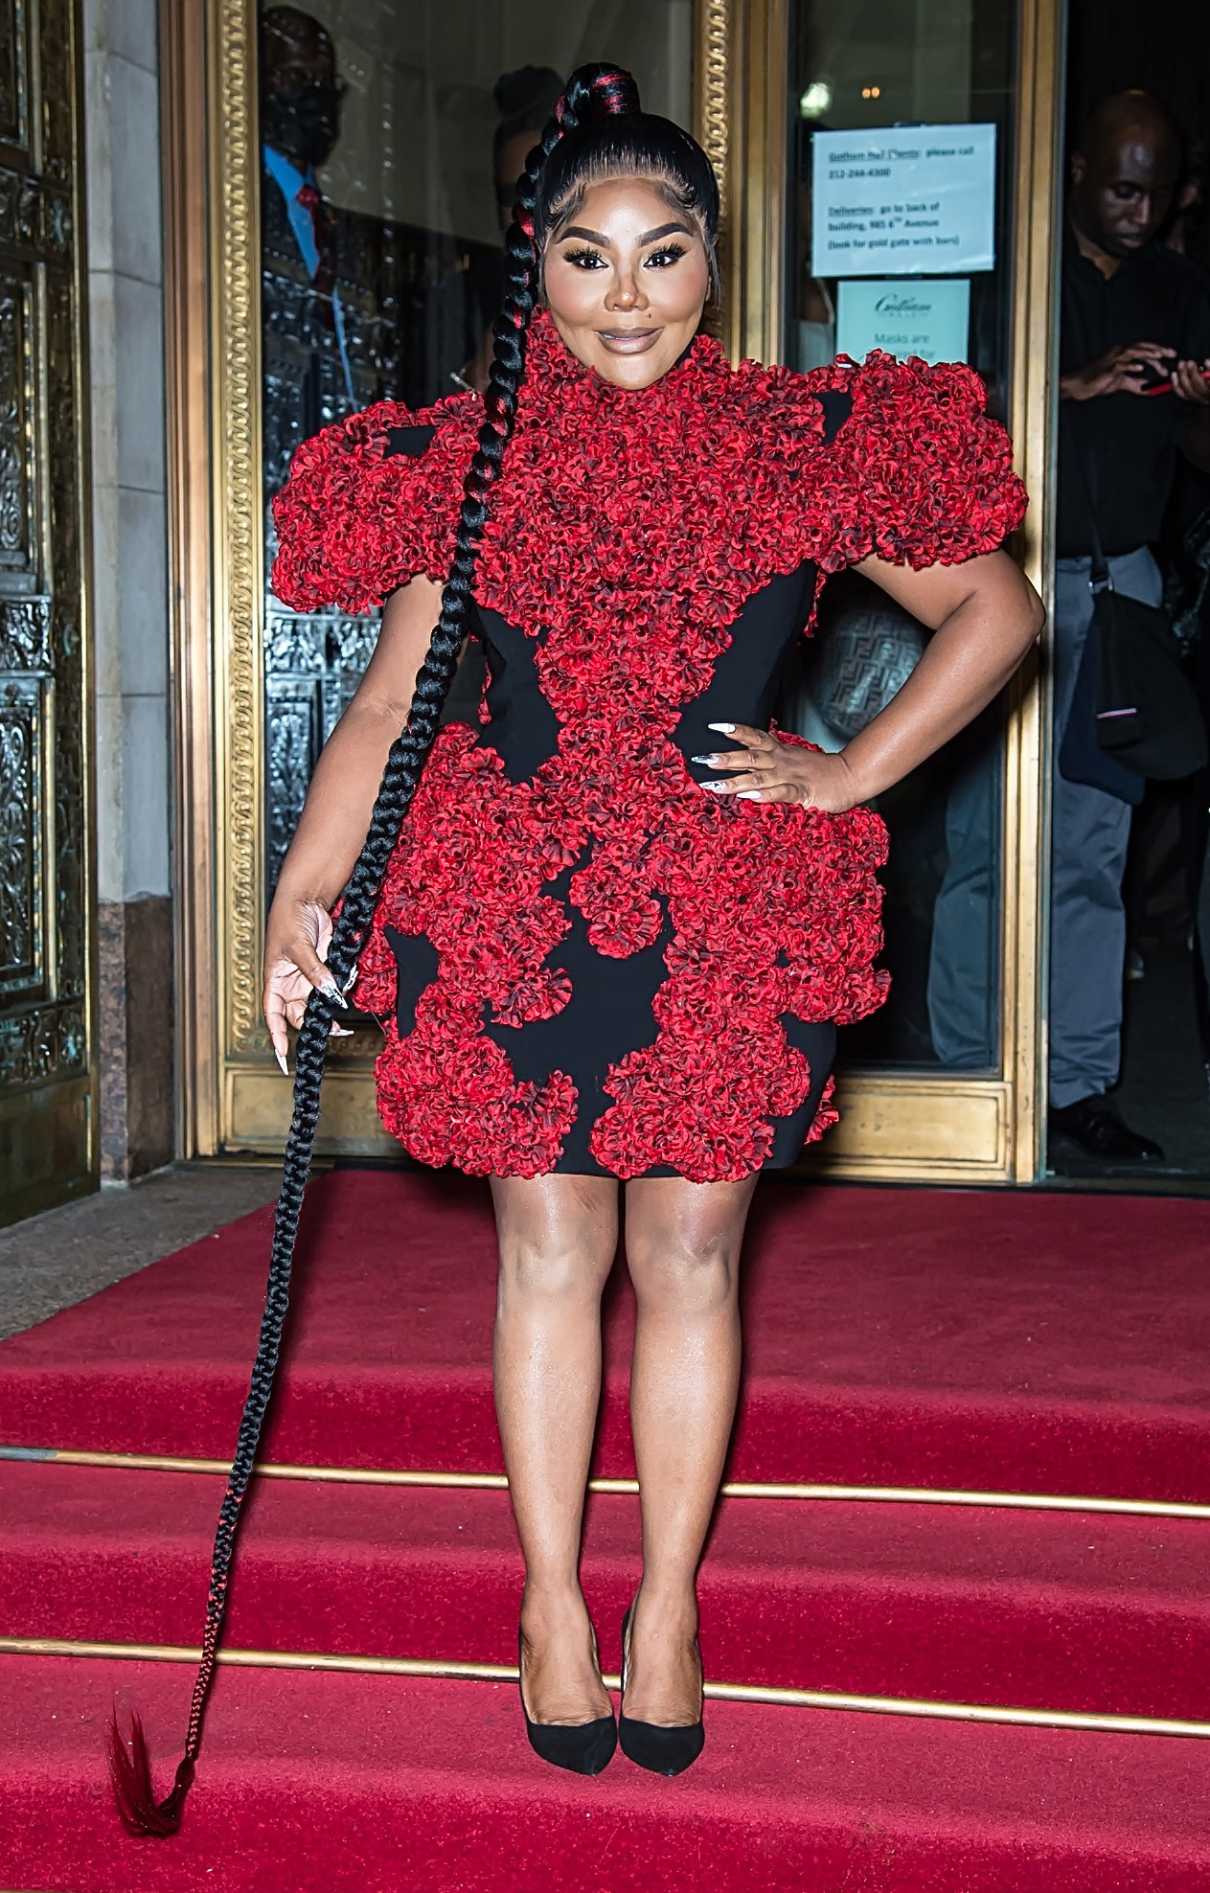 Lil Kim in a Red and Black Floral Dress